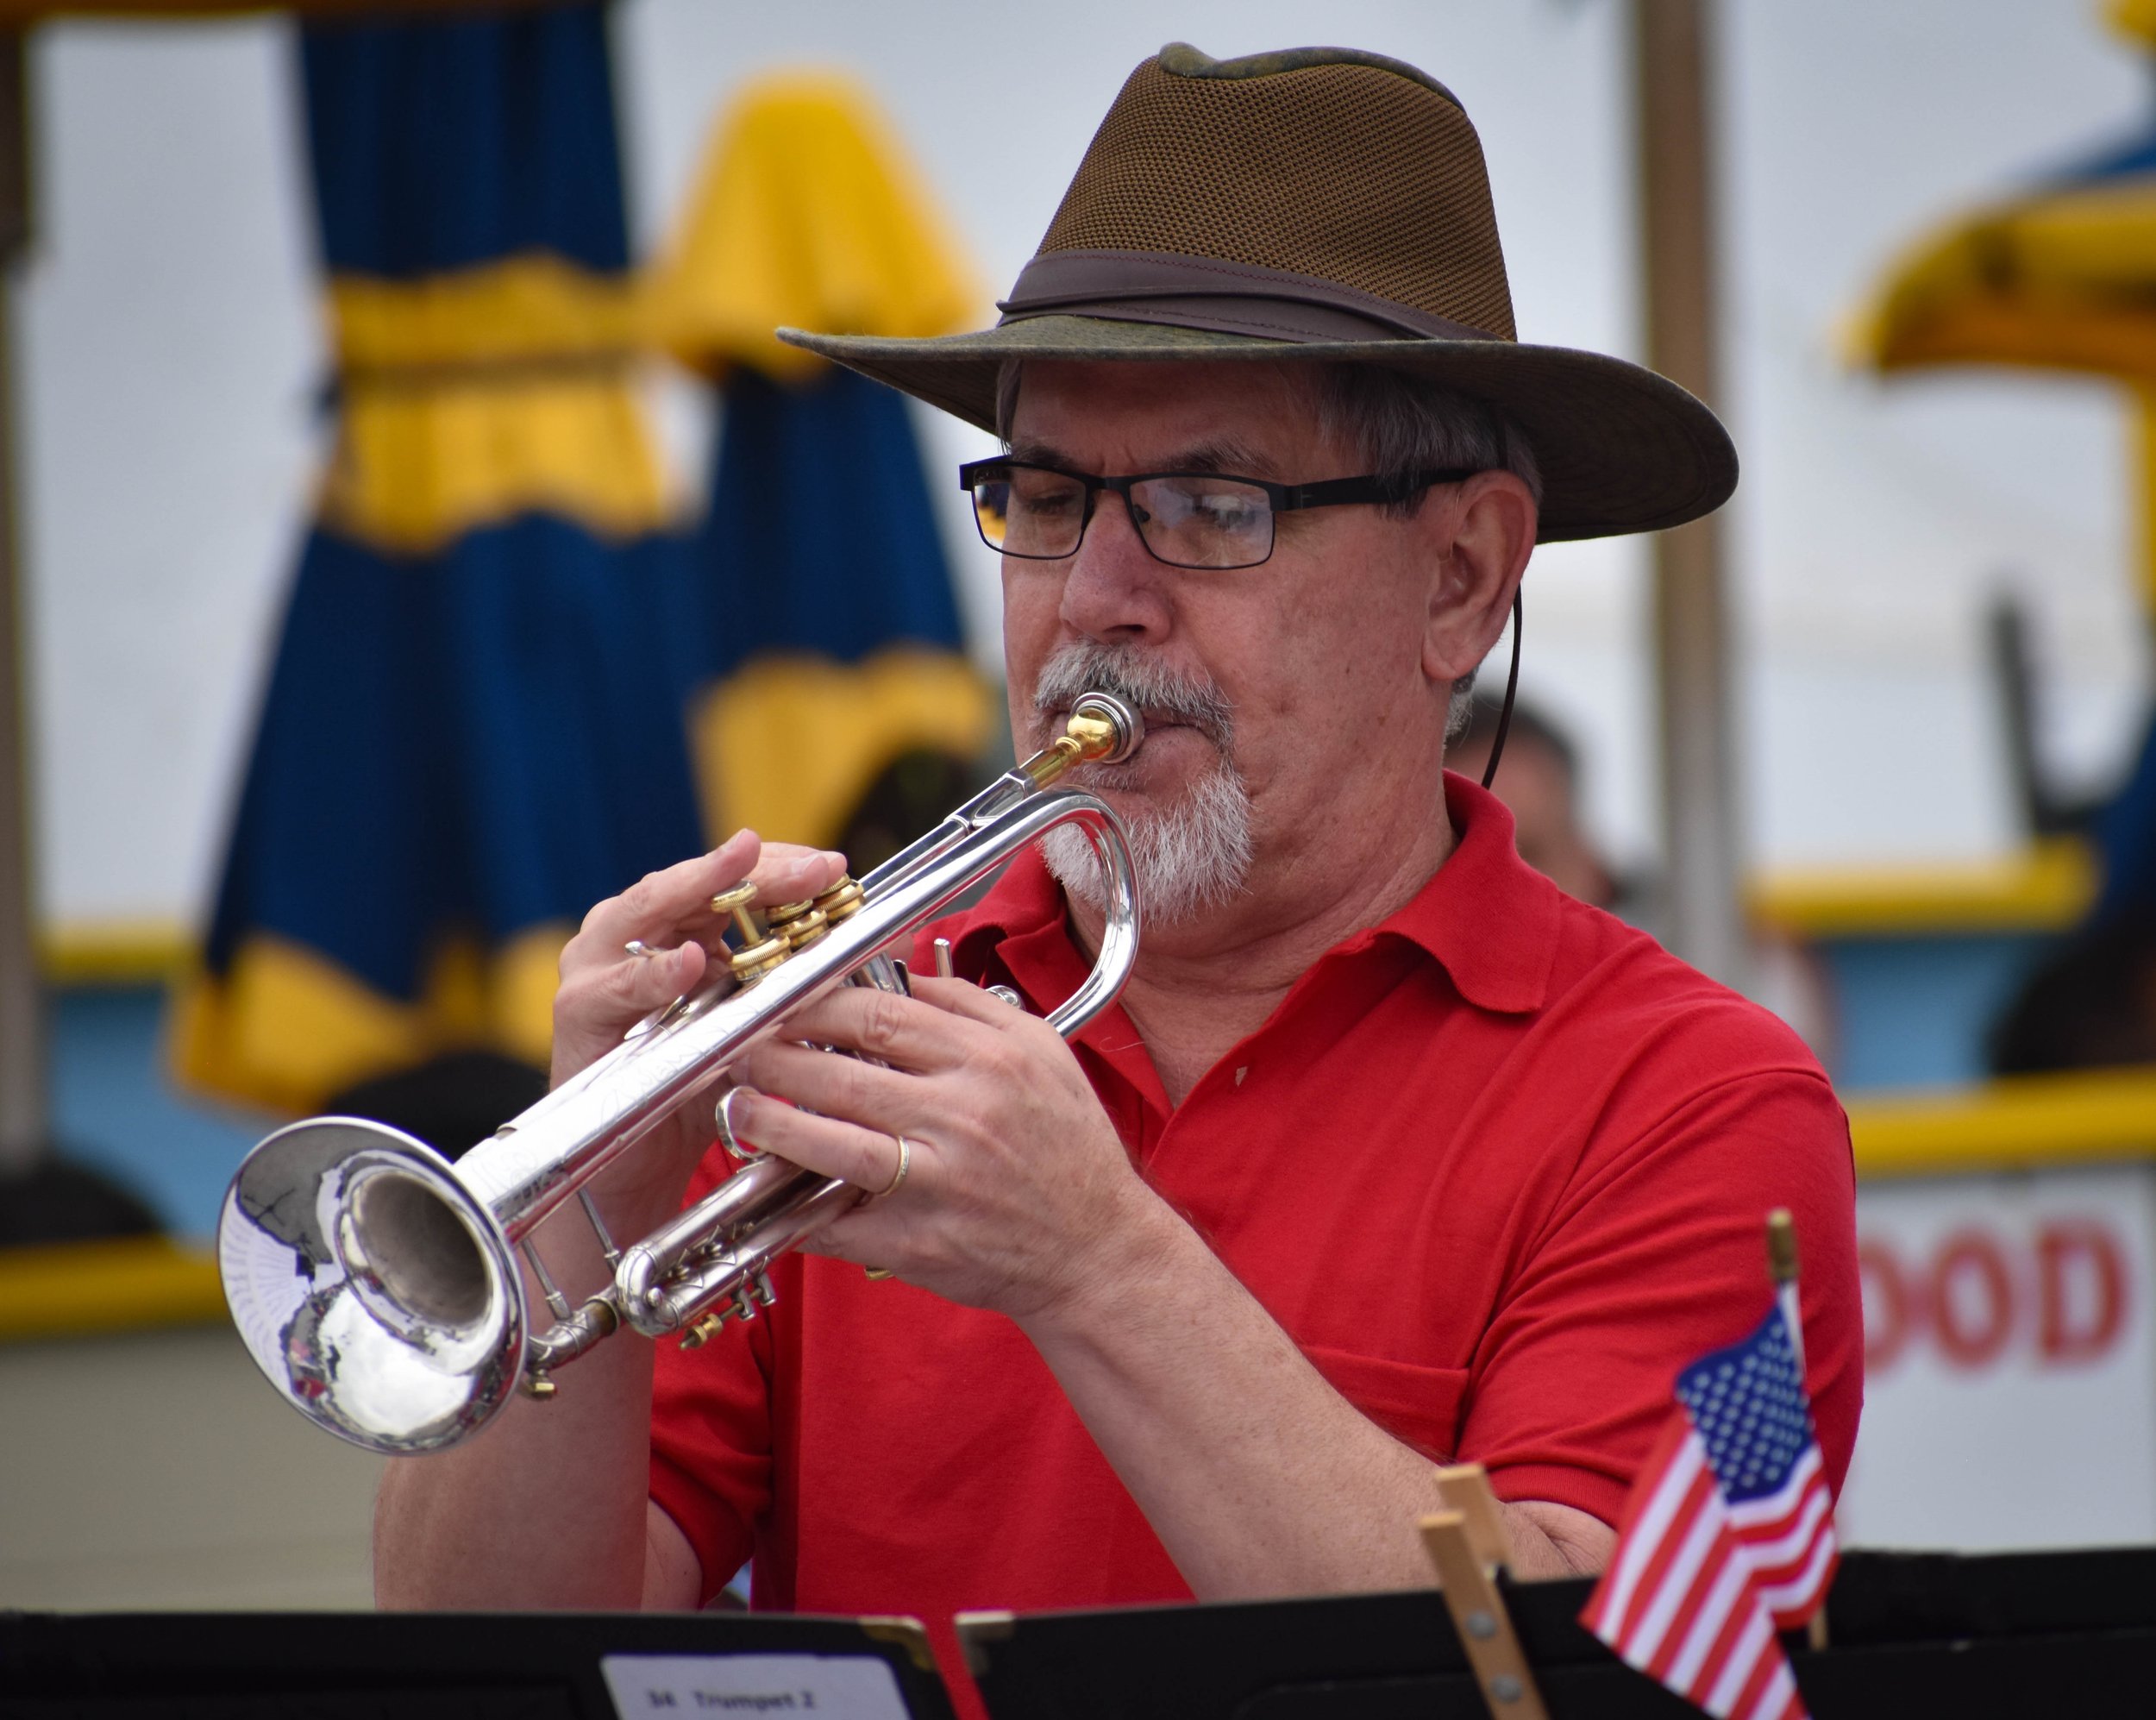 05-29-2023 LCCB and Jazz Band Memorial Day Concerts by Peyton Webster153-114.jpg